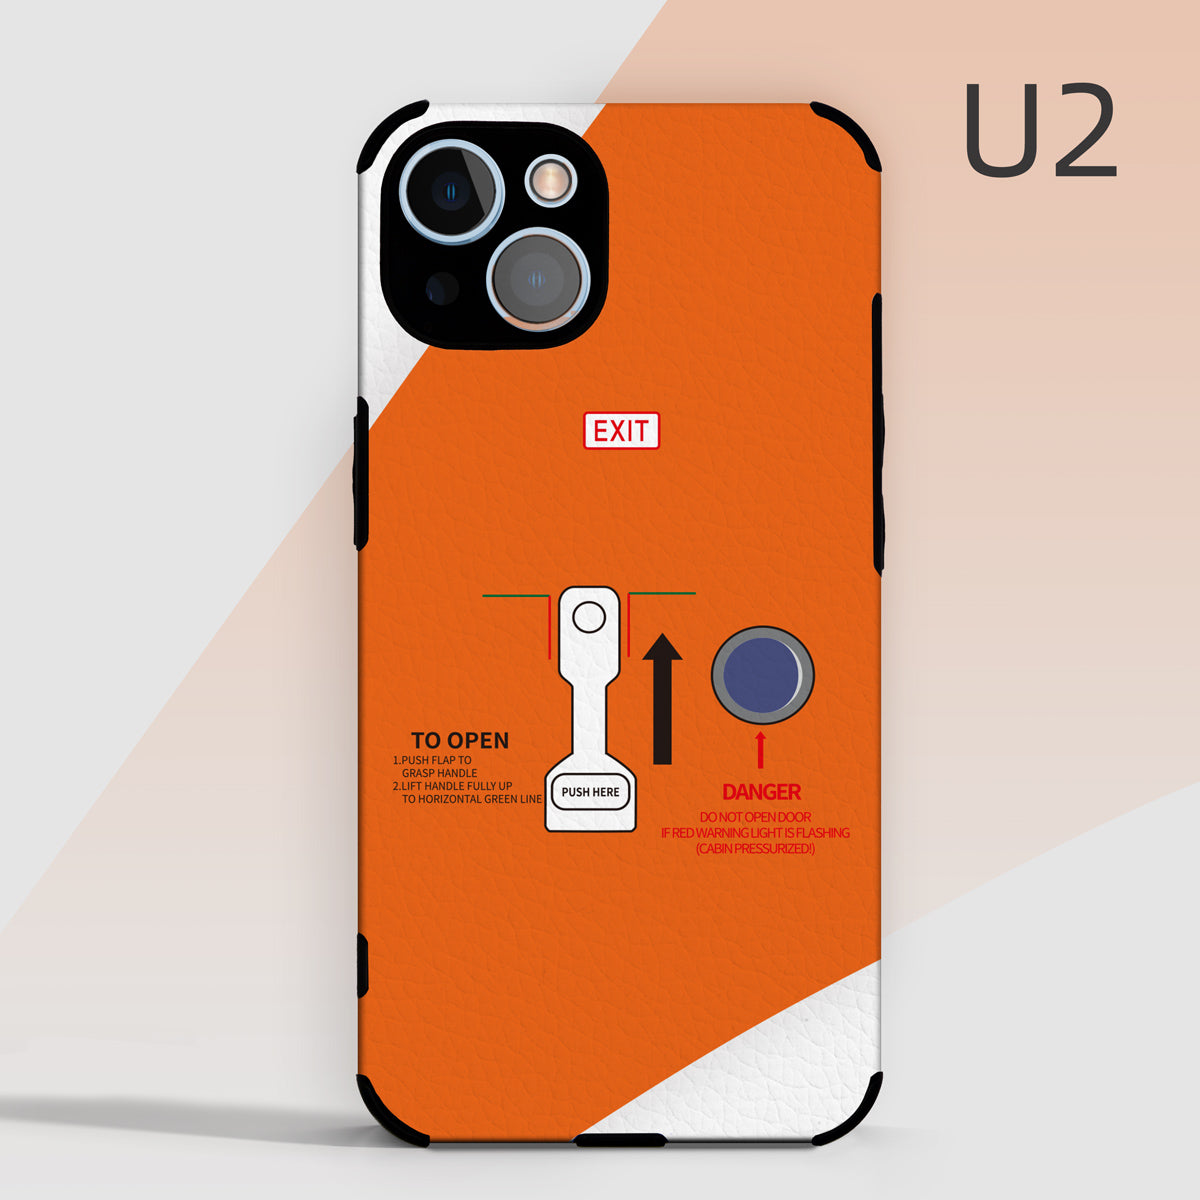 Easyjet Airbus A320 Phone Case aviation gift pilot iPhone Andriod Huawei XIaomi Samsung Apple Crew